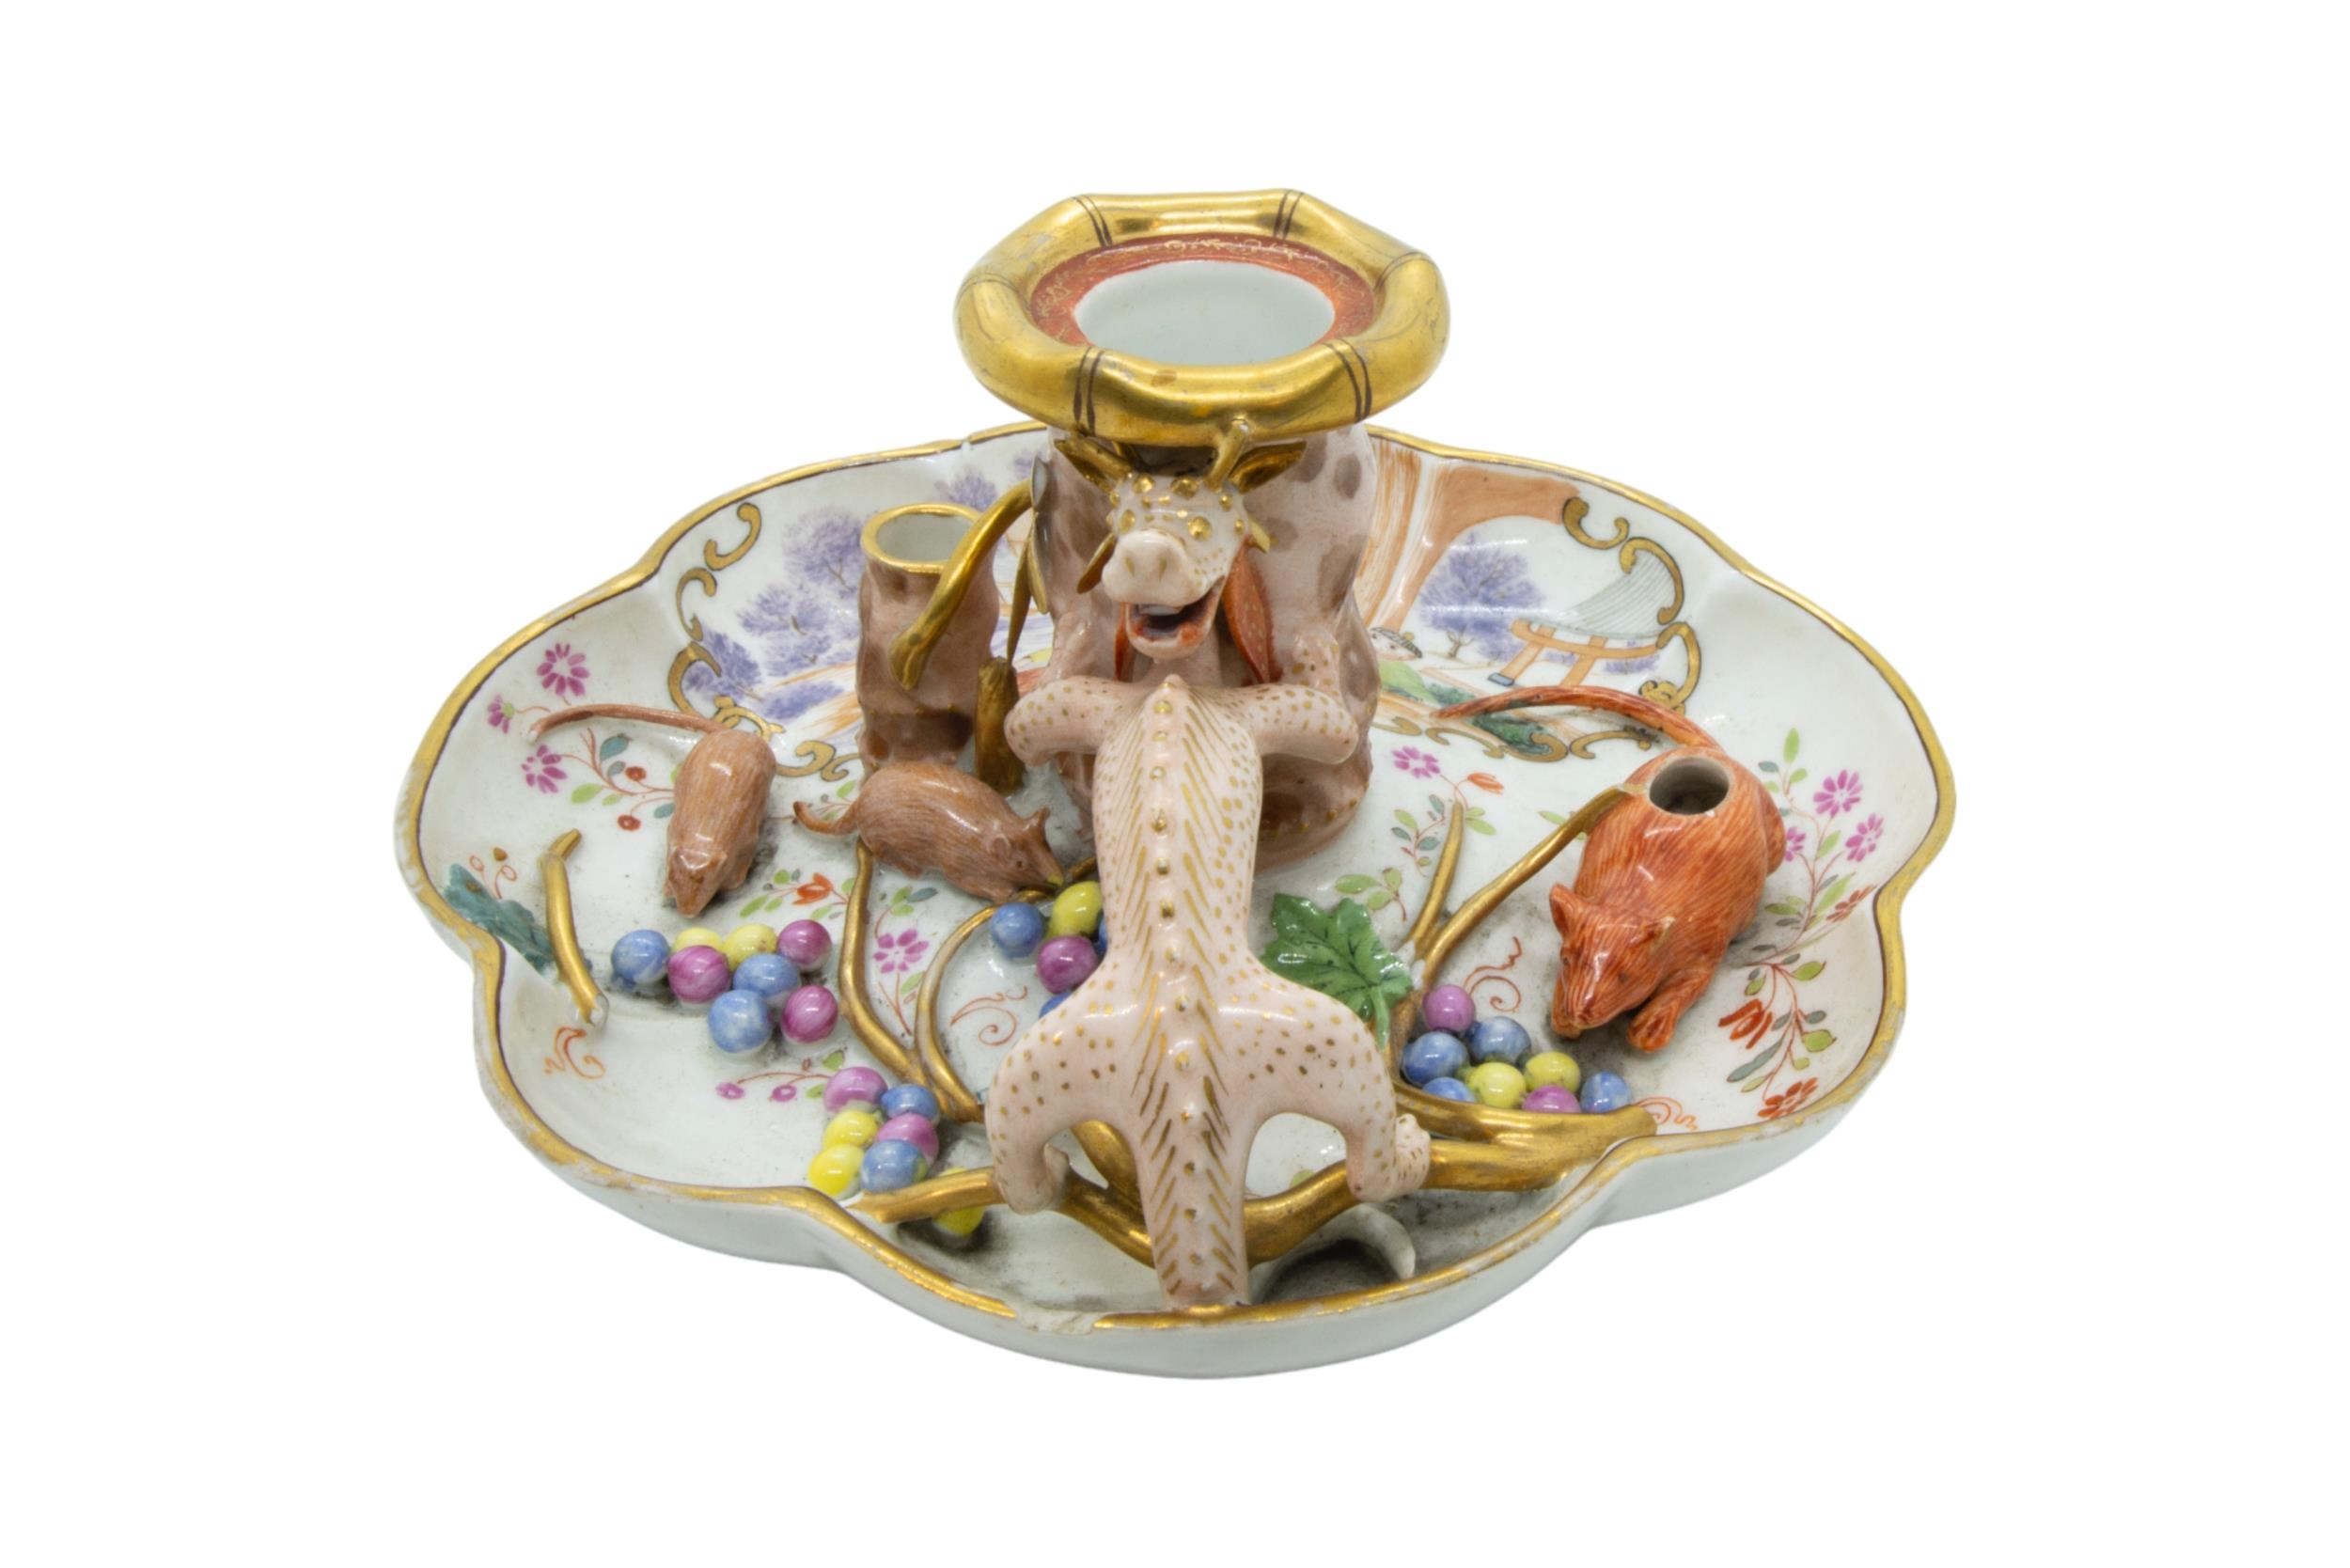 A MEISSEN CHAMBERSTICK AND MEISSEN CUP AND SAUCER, 18TH/19TH CENTURY, the lobed chamberstick painted - Image 6 of 7